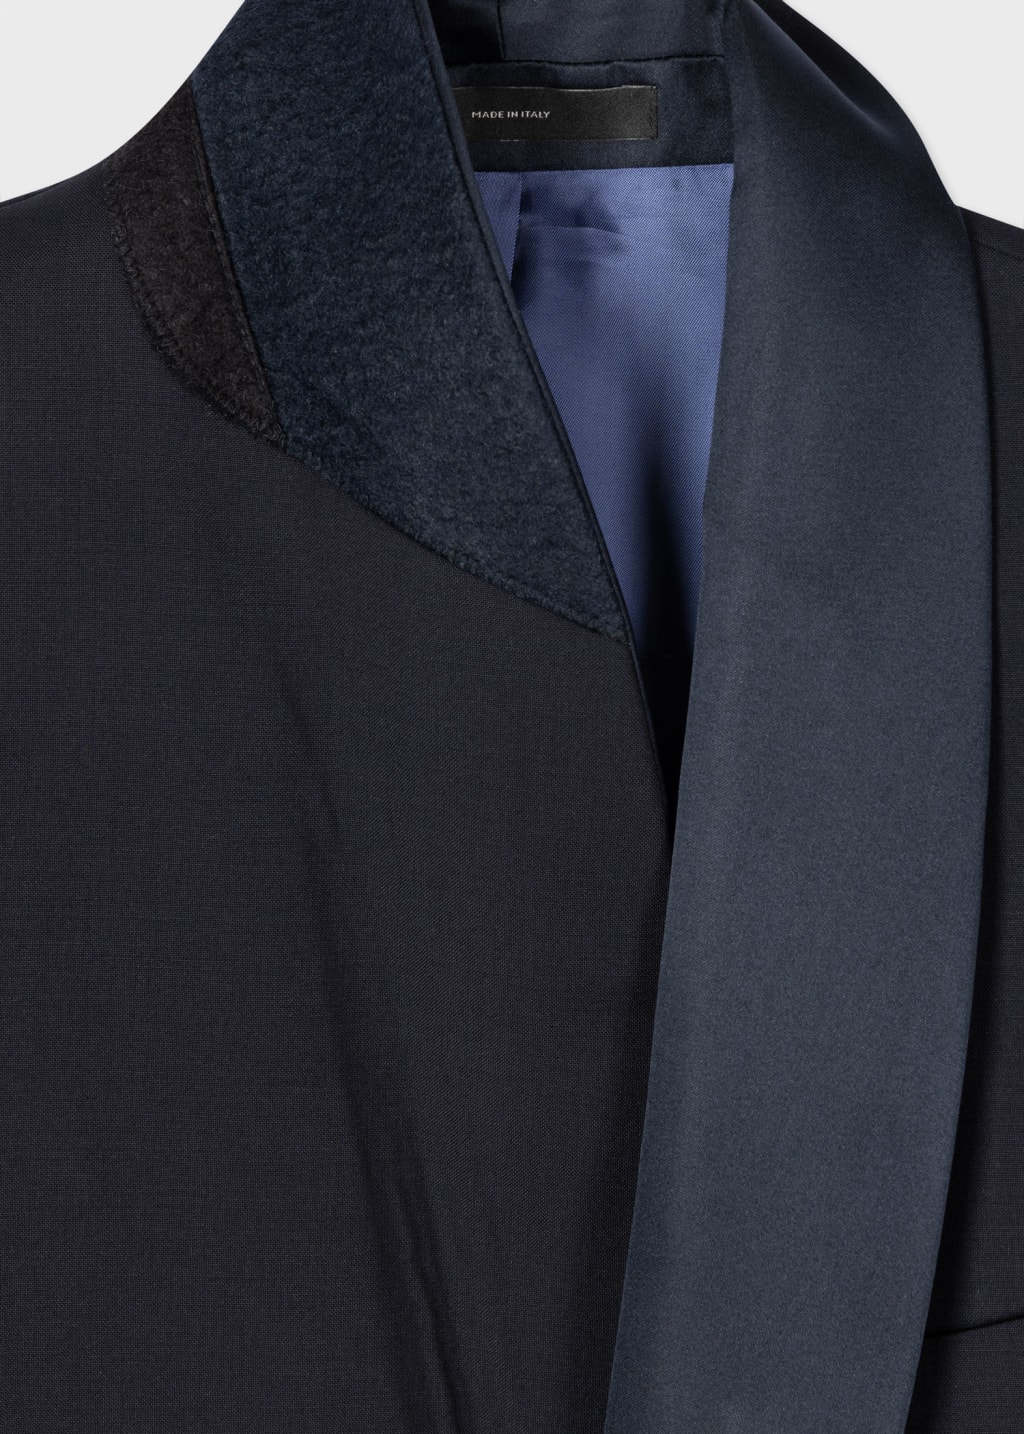 Product view - Slim-Fit Navy Wool-Mohair Evening Blazer